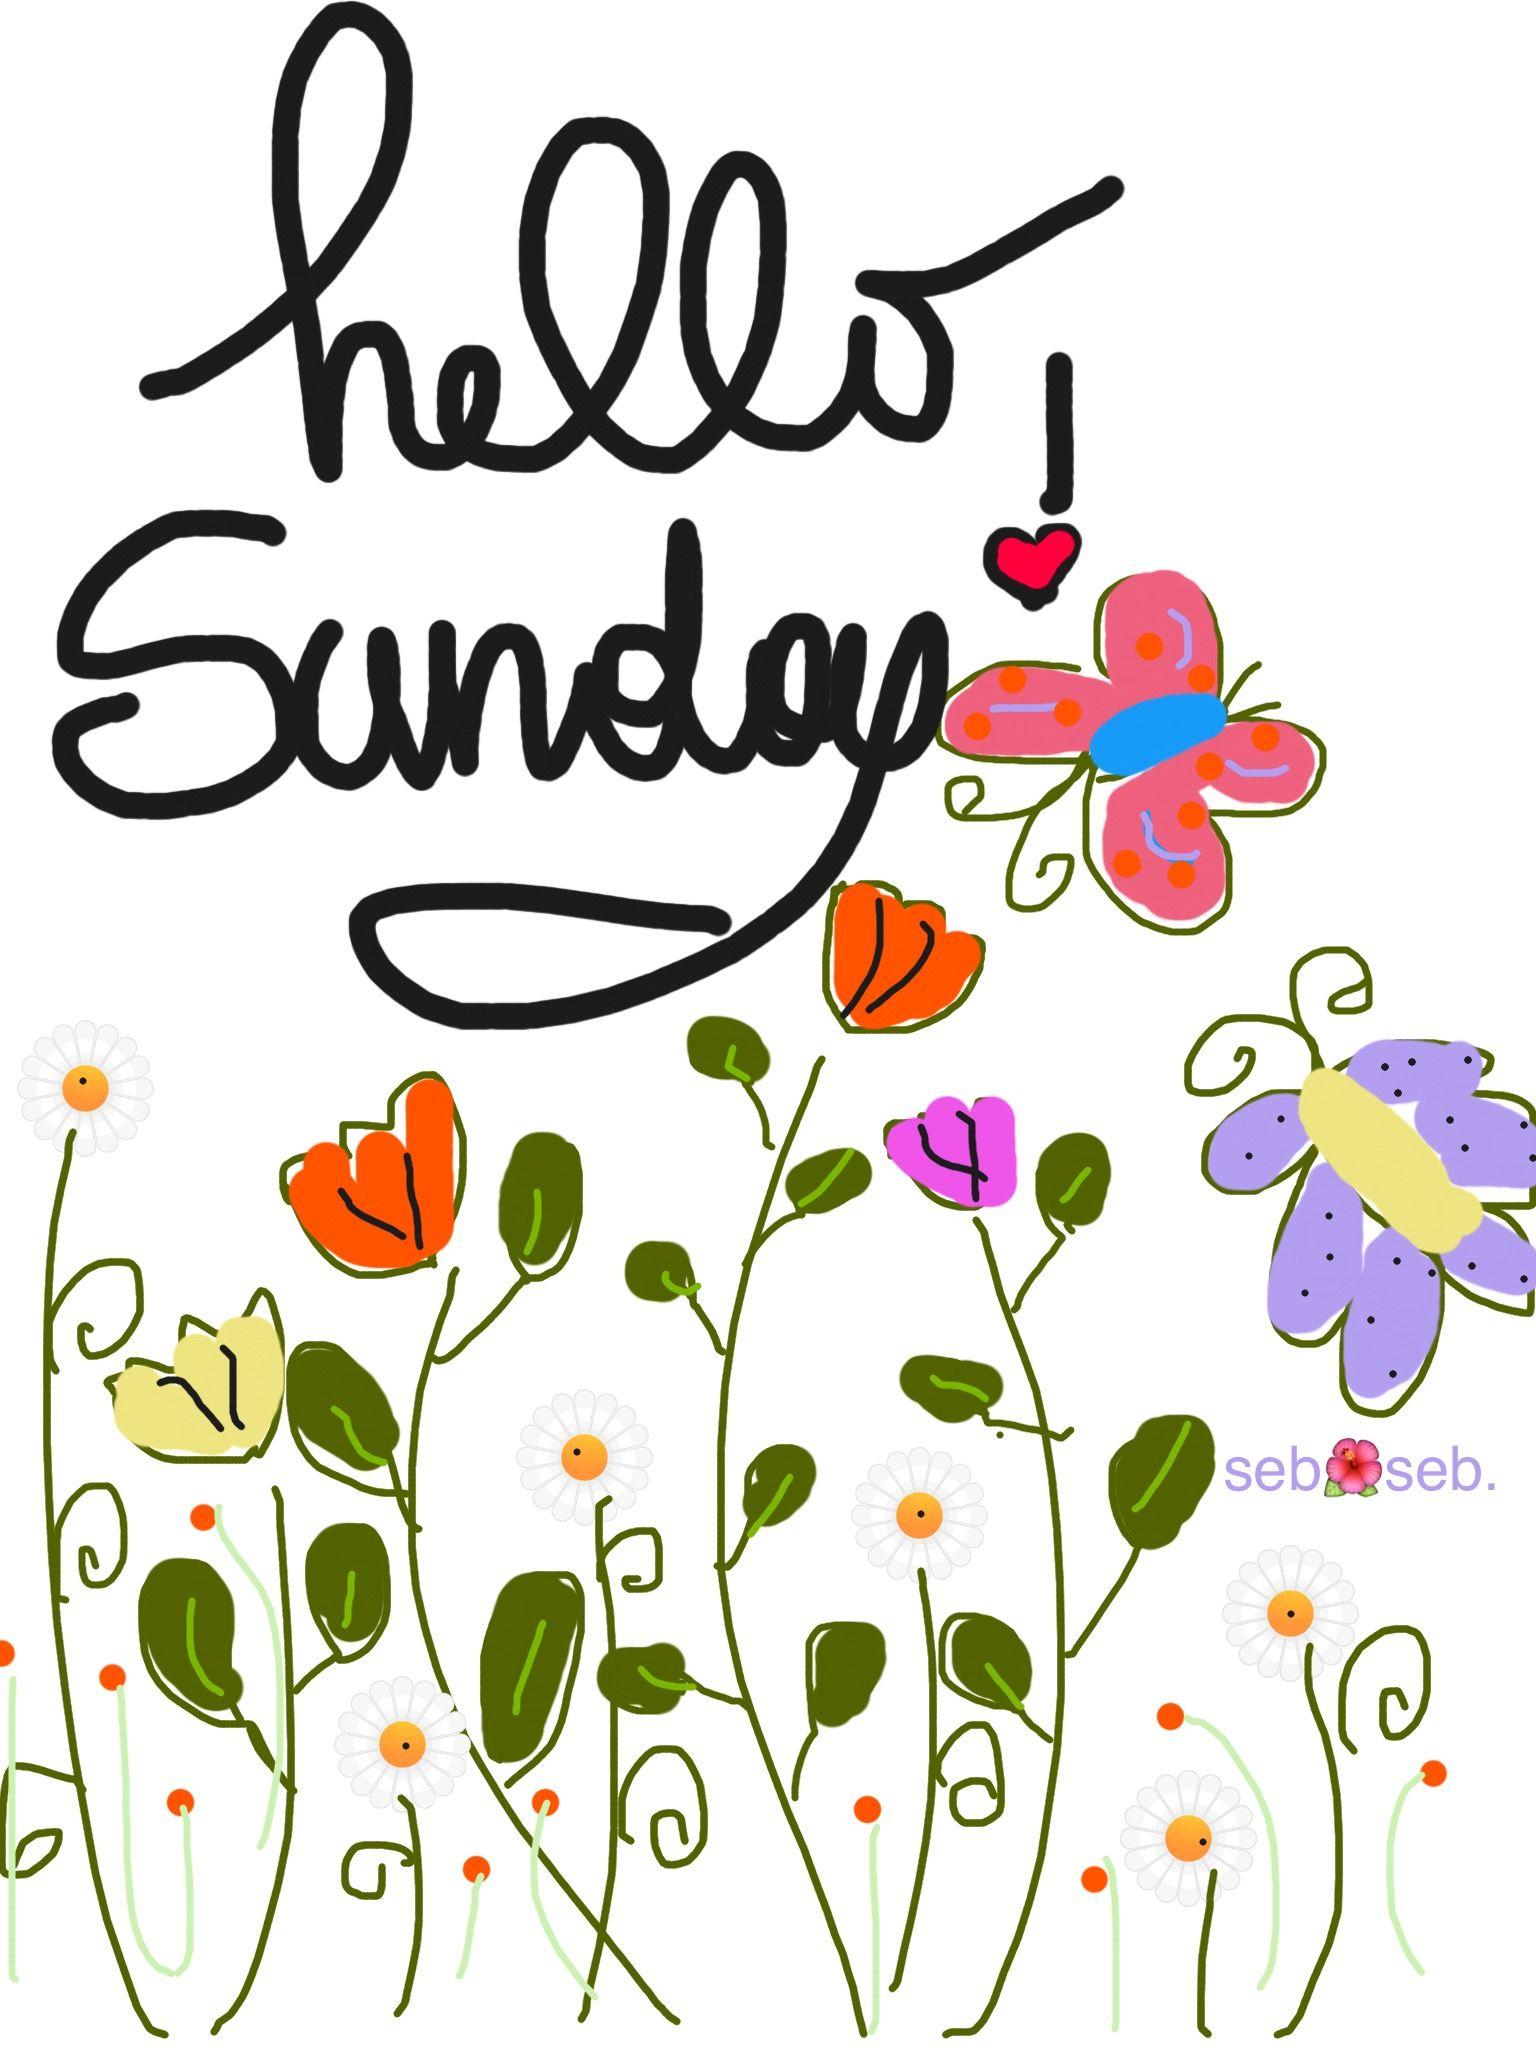 Hello Sunday ! ❤️. Greetings & More!. Sunday quotes